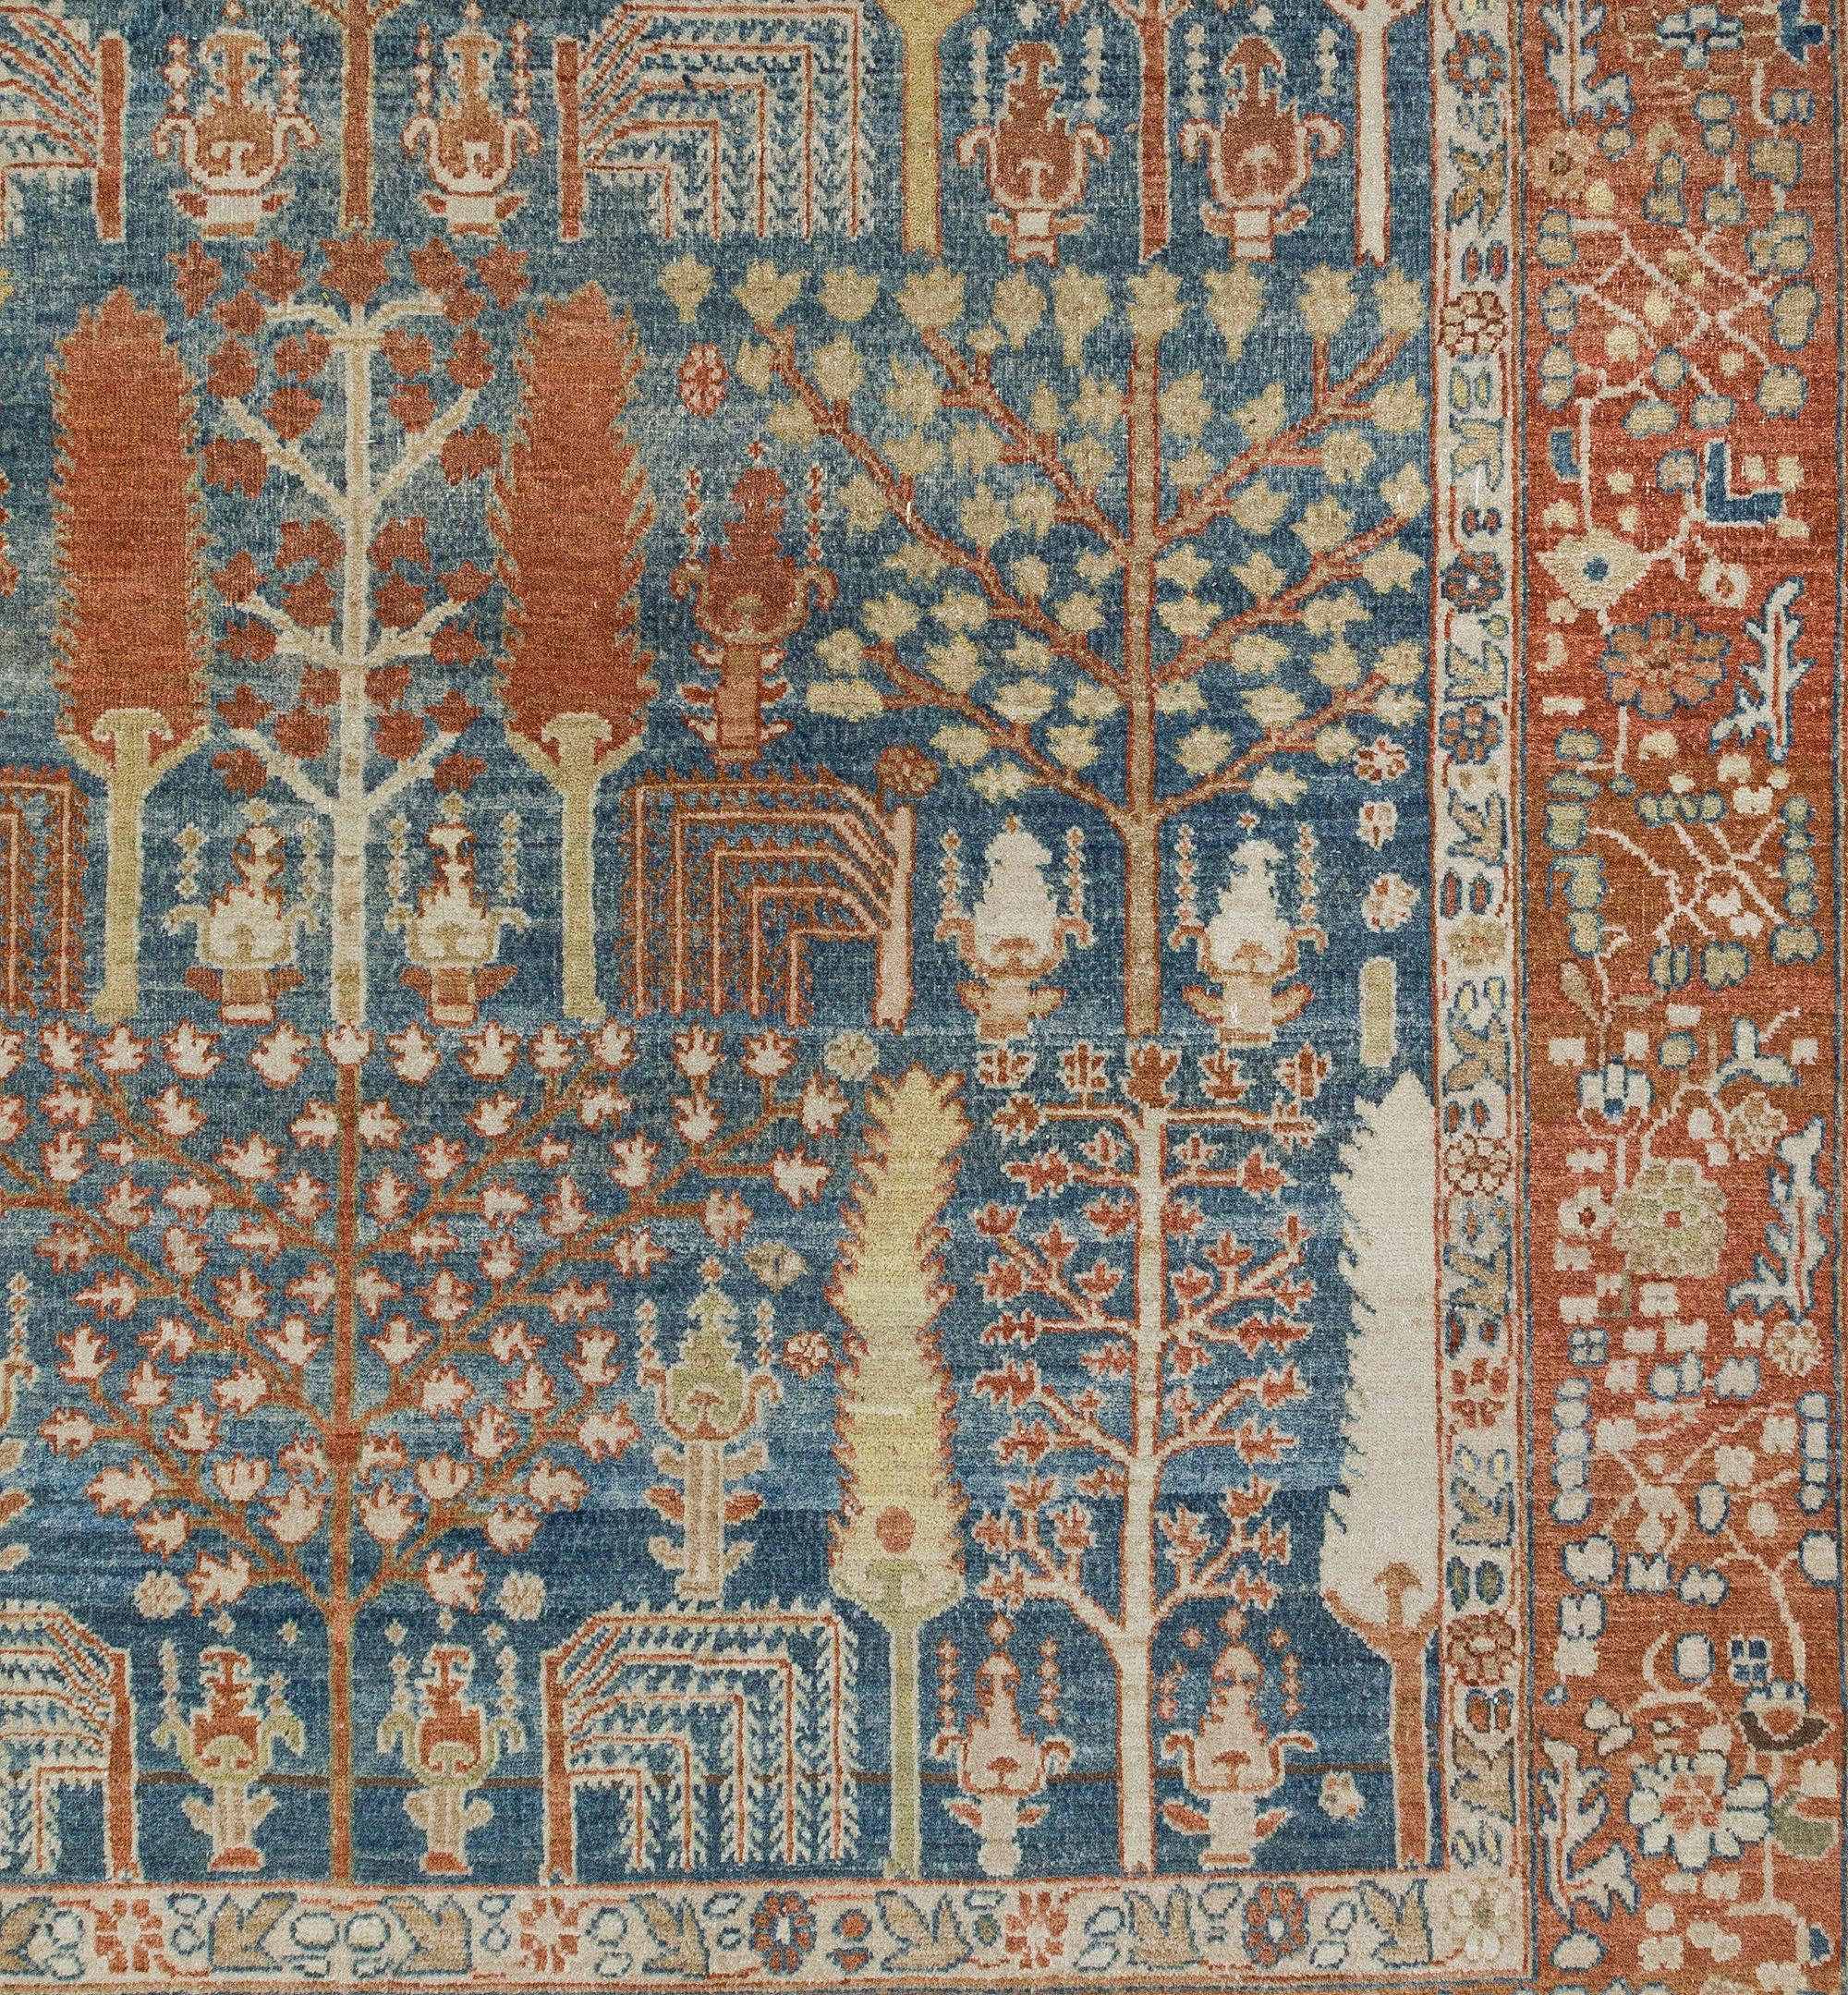 This rug resembles the rare and collectible antique Bakshaish rugs that were produced in the 19th century and earlier.  Due to their limited availability, NASIRI revived the ancient dyeing and weaving techniques that have dissolved over the years to